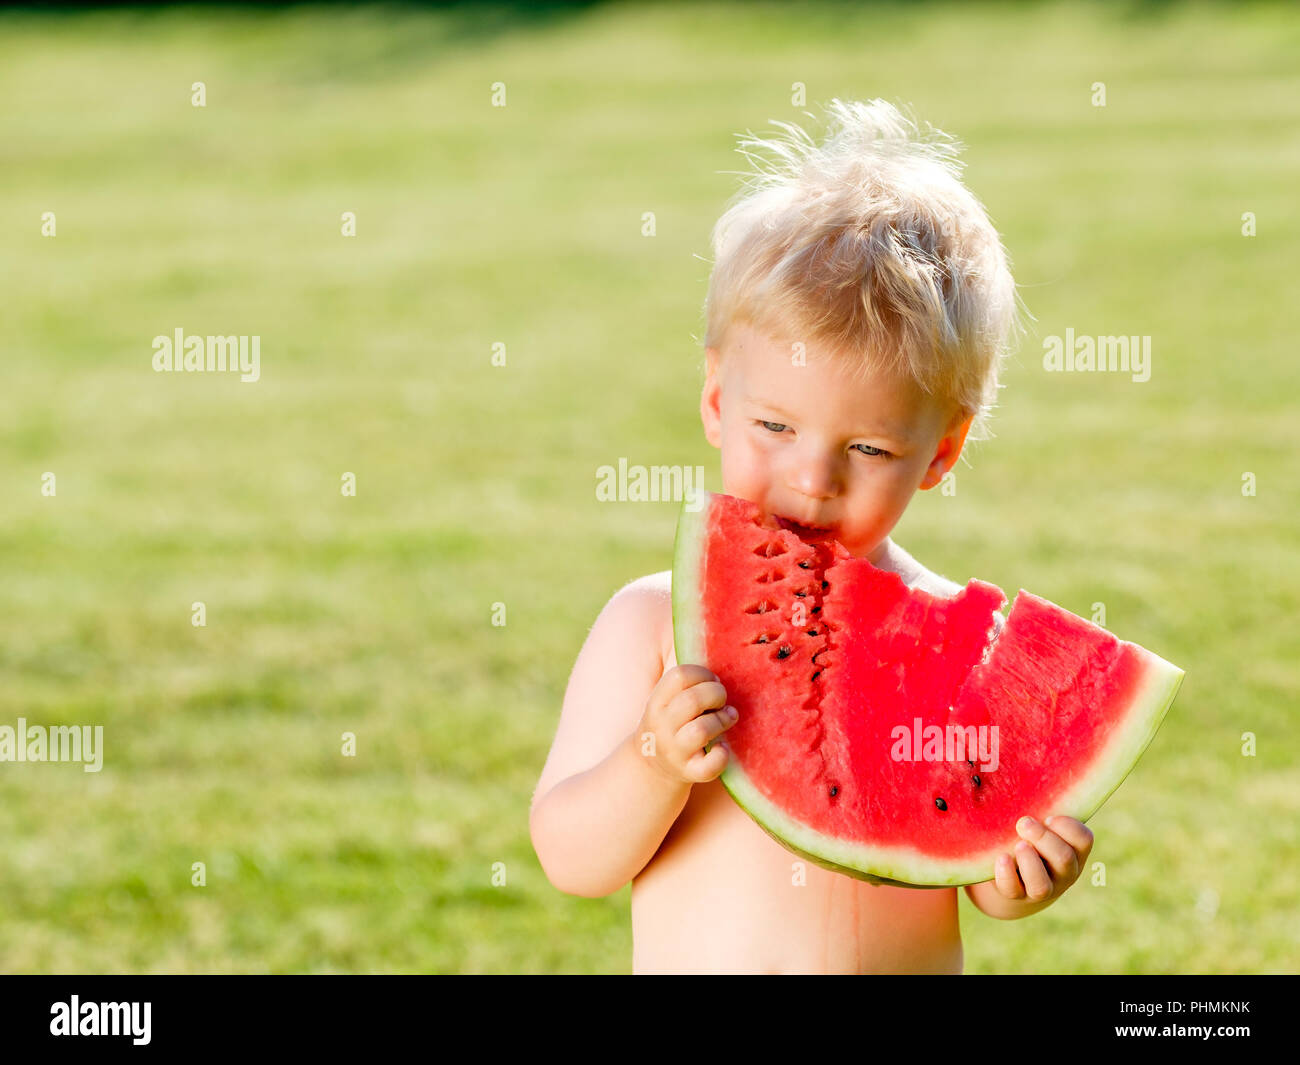 One year old baby boy eating watermelon in the garden Stock Photo